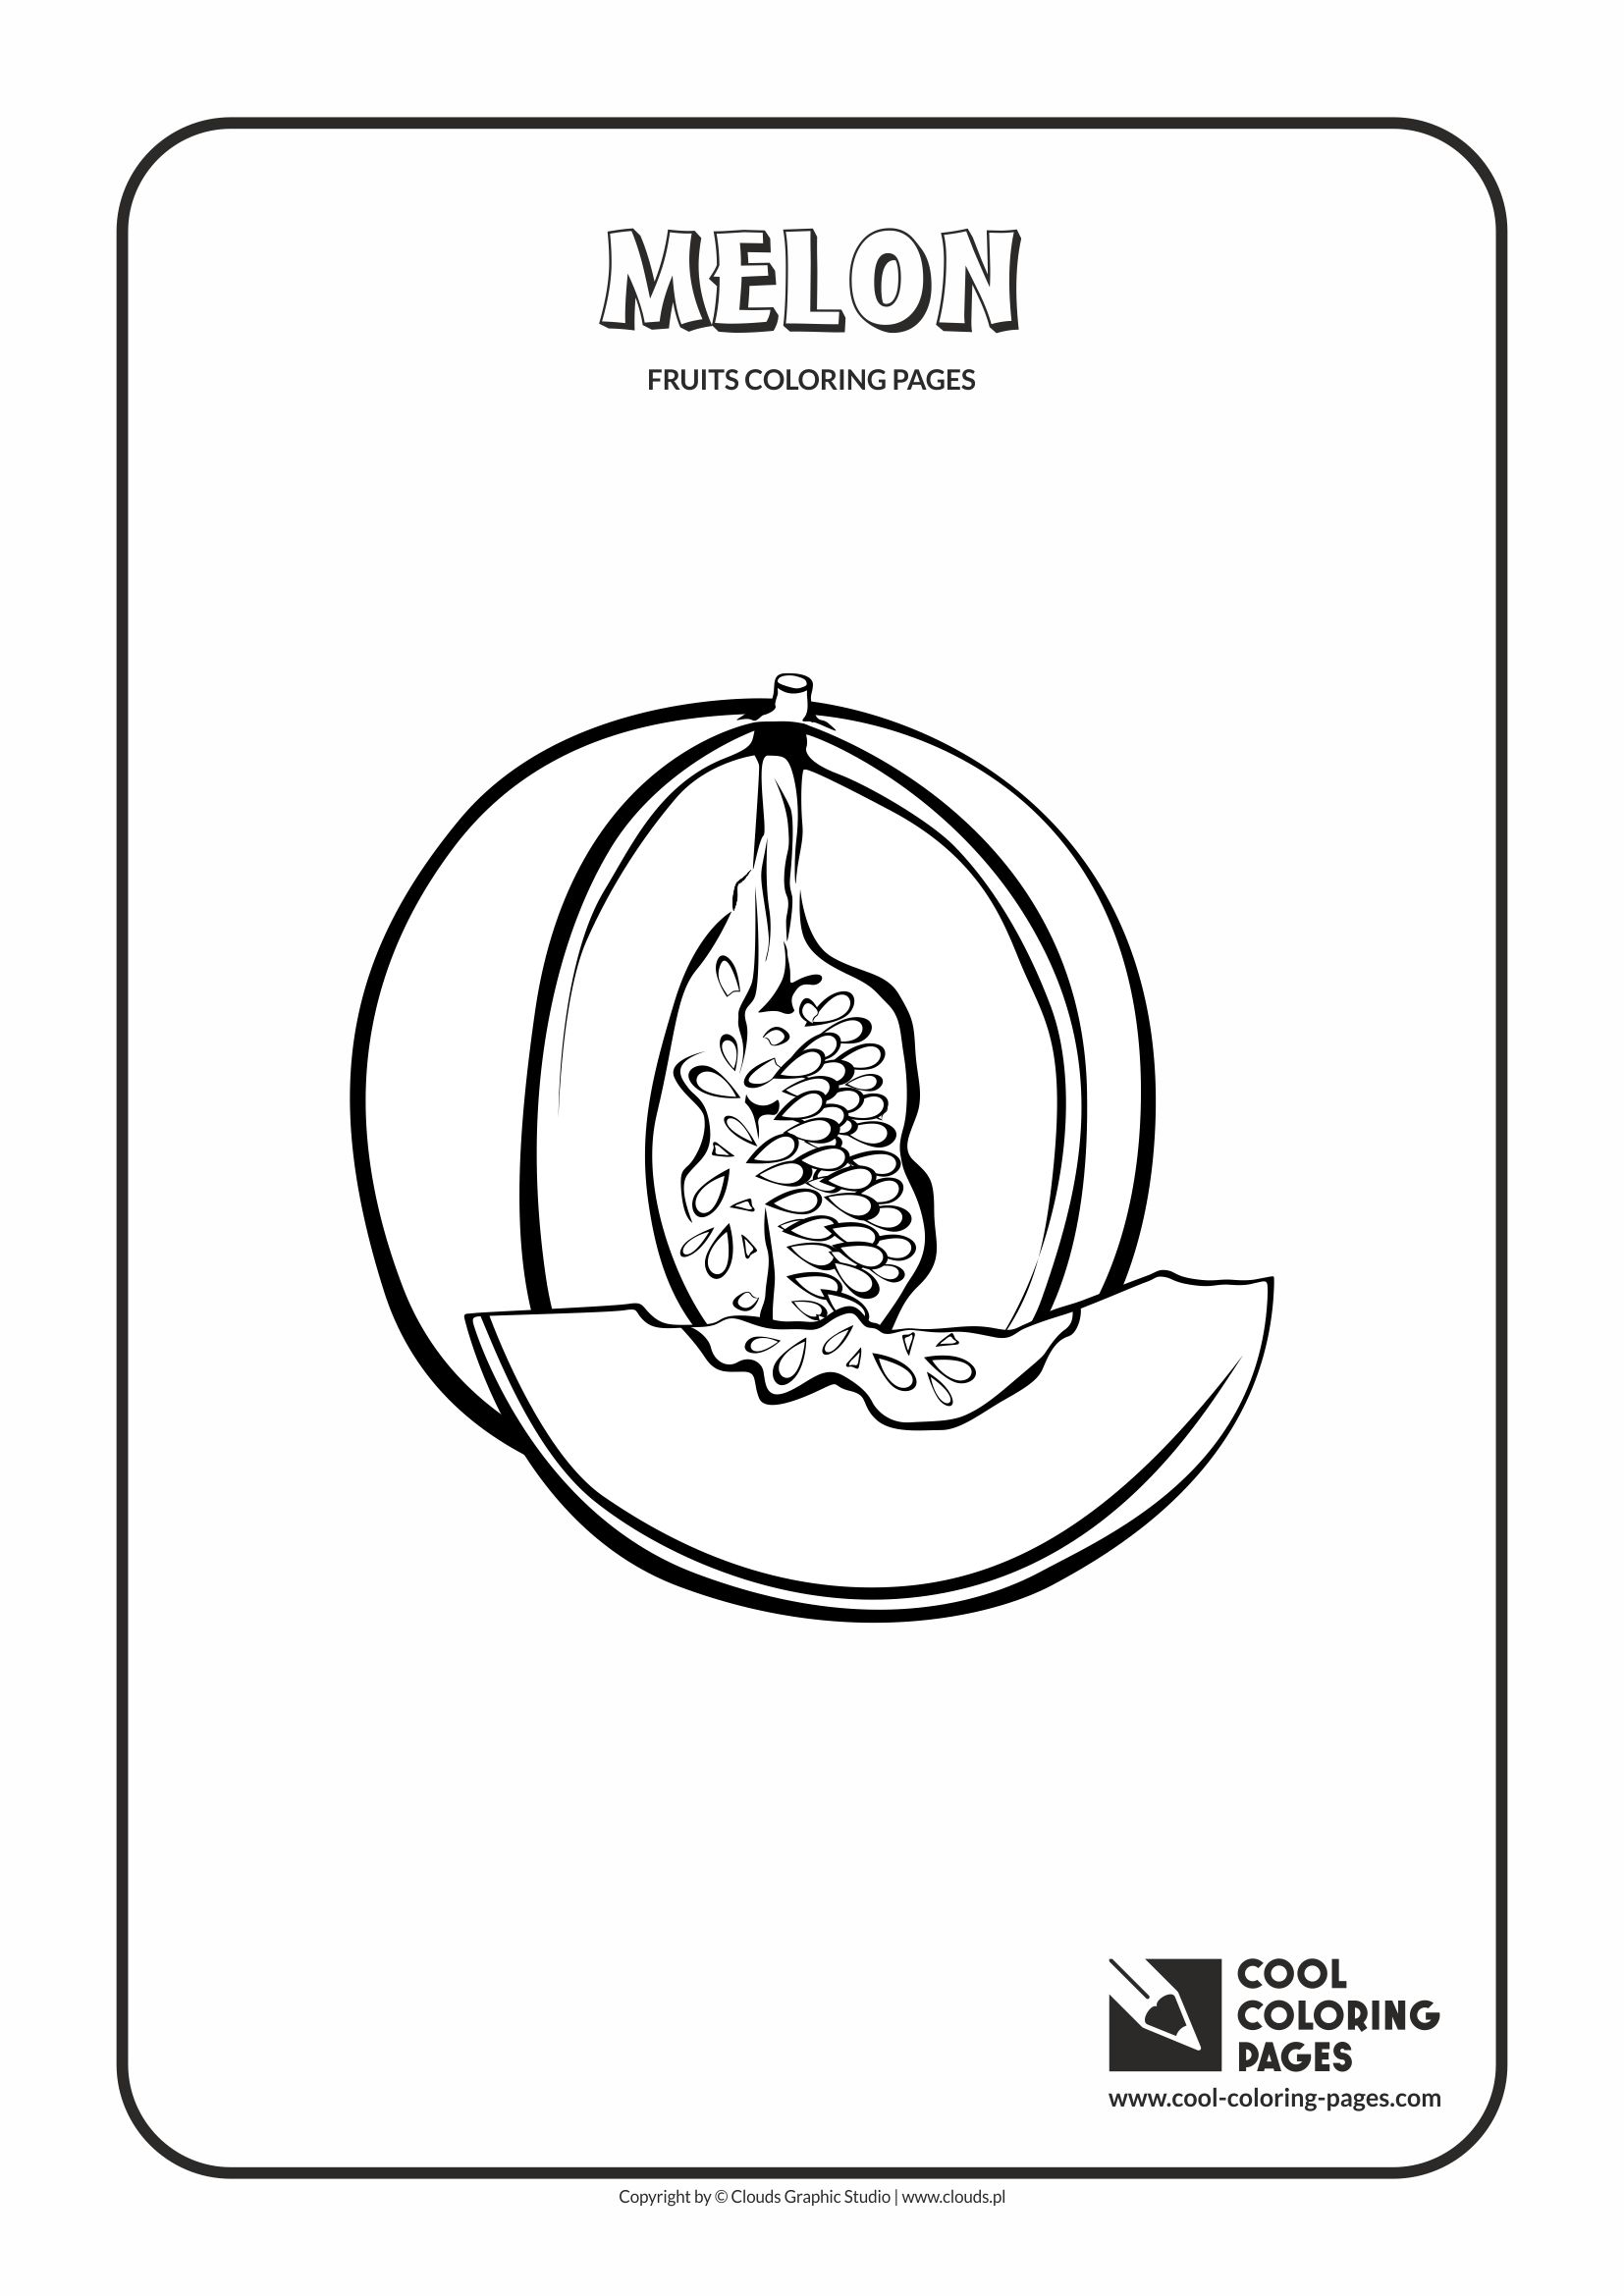 Cool Coloring Pages - Plants / Melon / Coloring page with horned melon